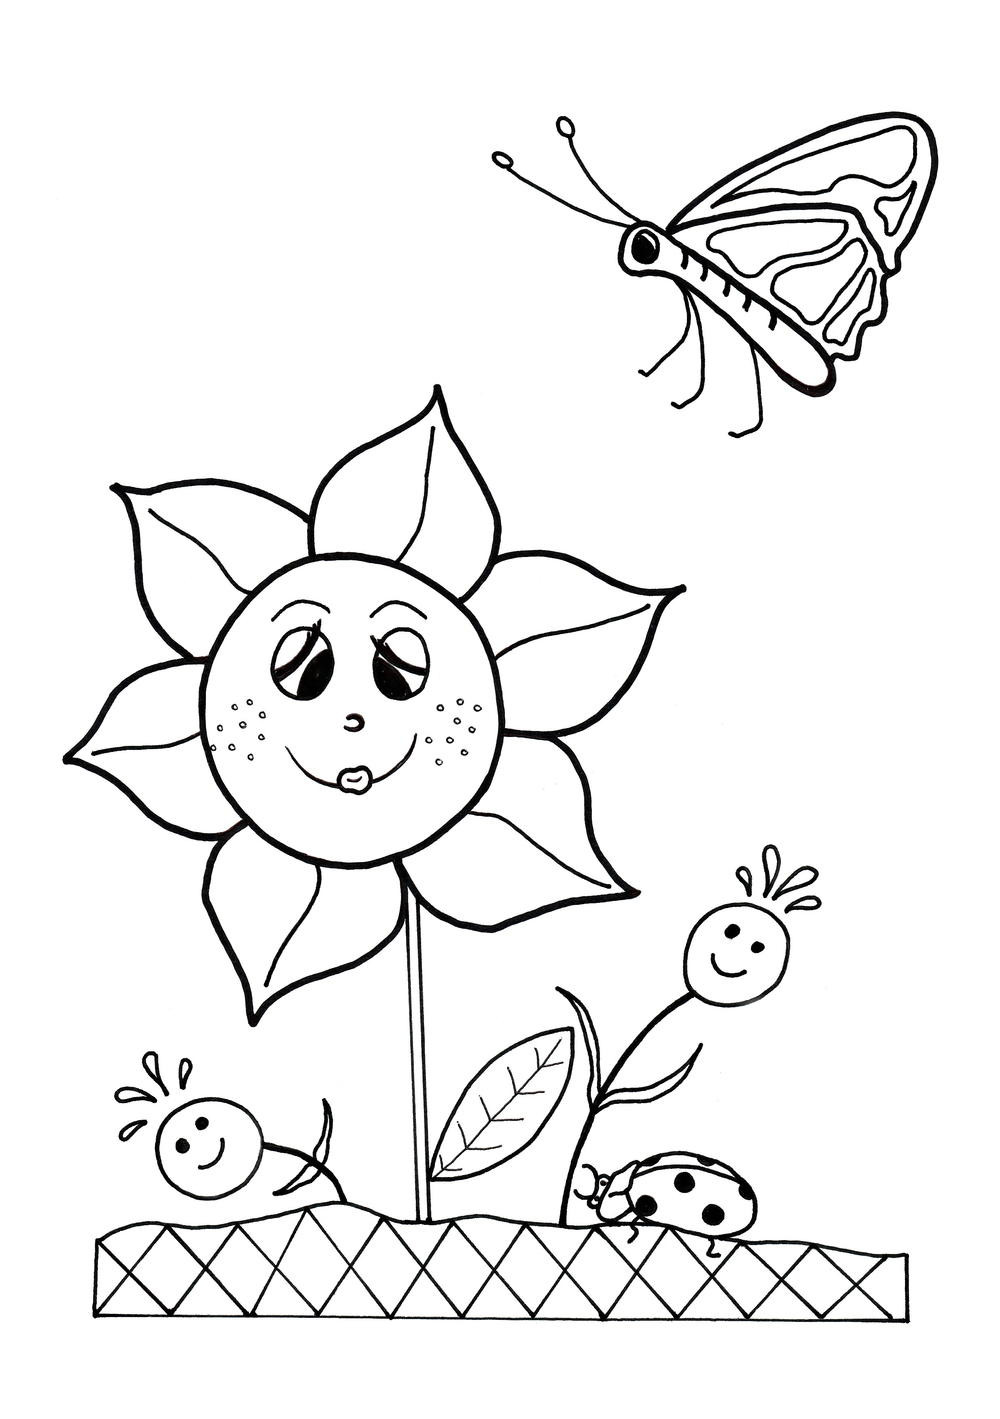 Spring Coloring Pages For Toddlers
 Dancing Flowers Spring Coloring Sheet